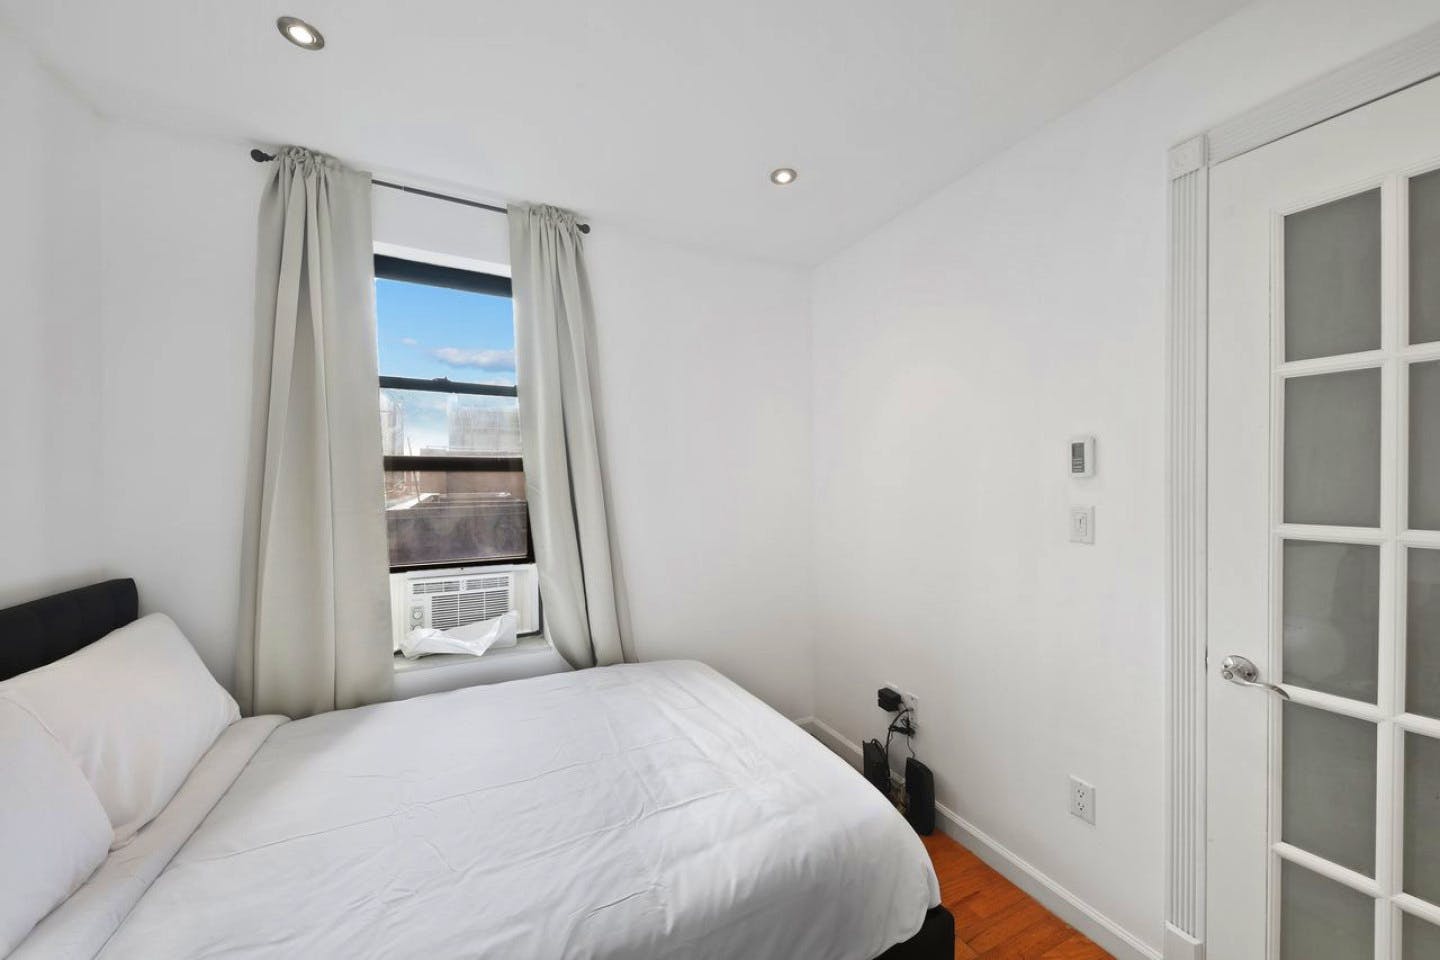 Exceptional Stunning Apt. near Morningside Park and Columbia University